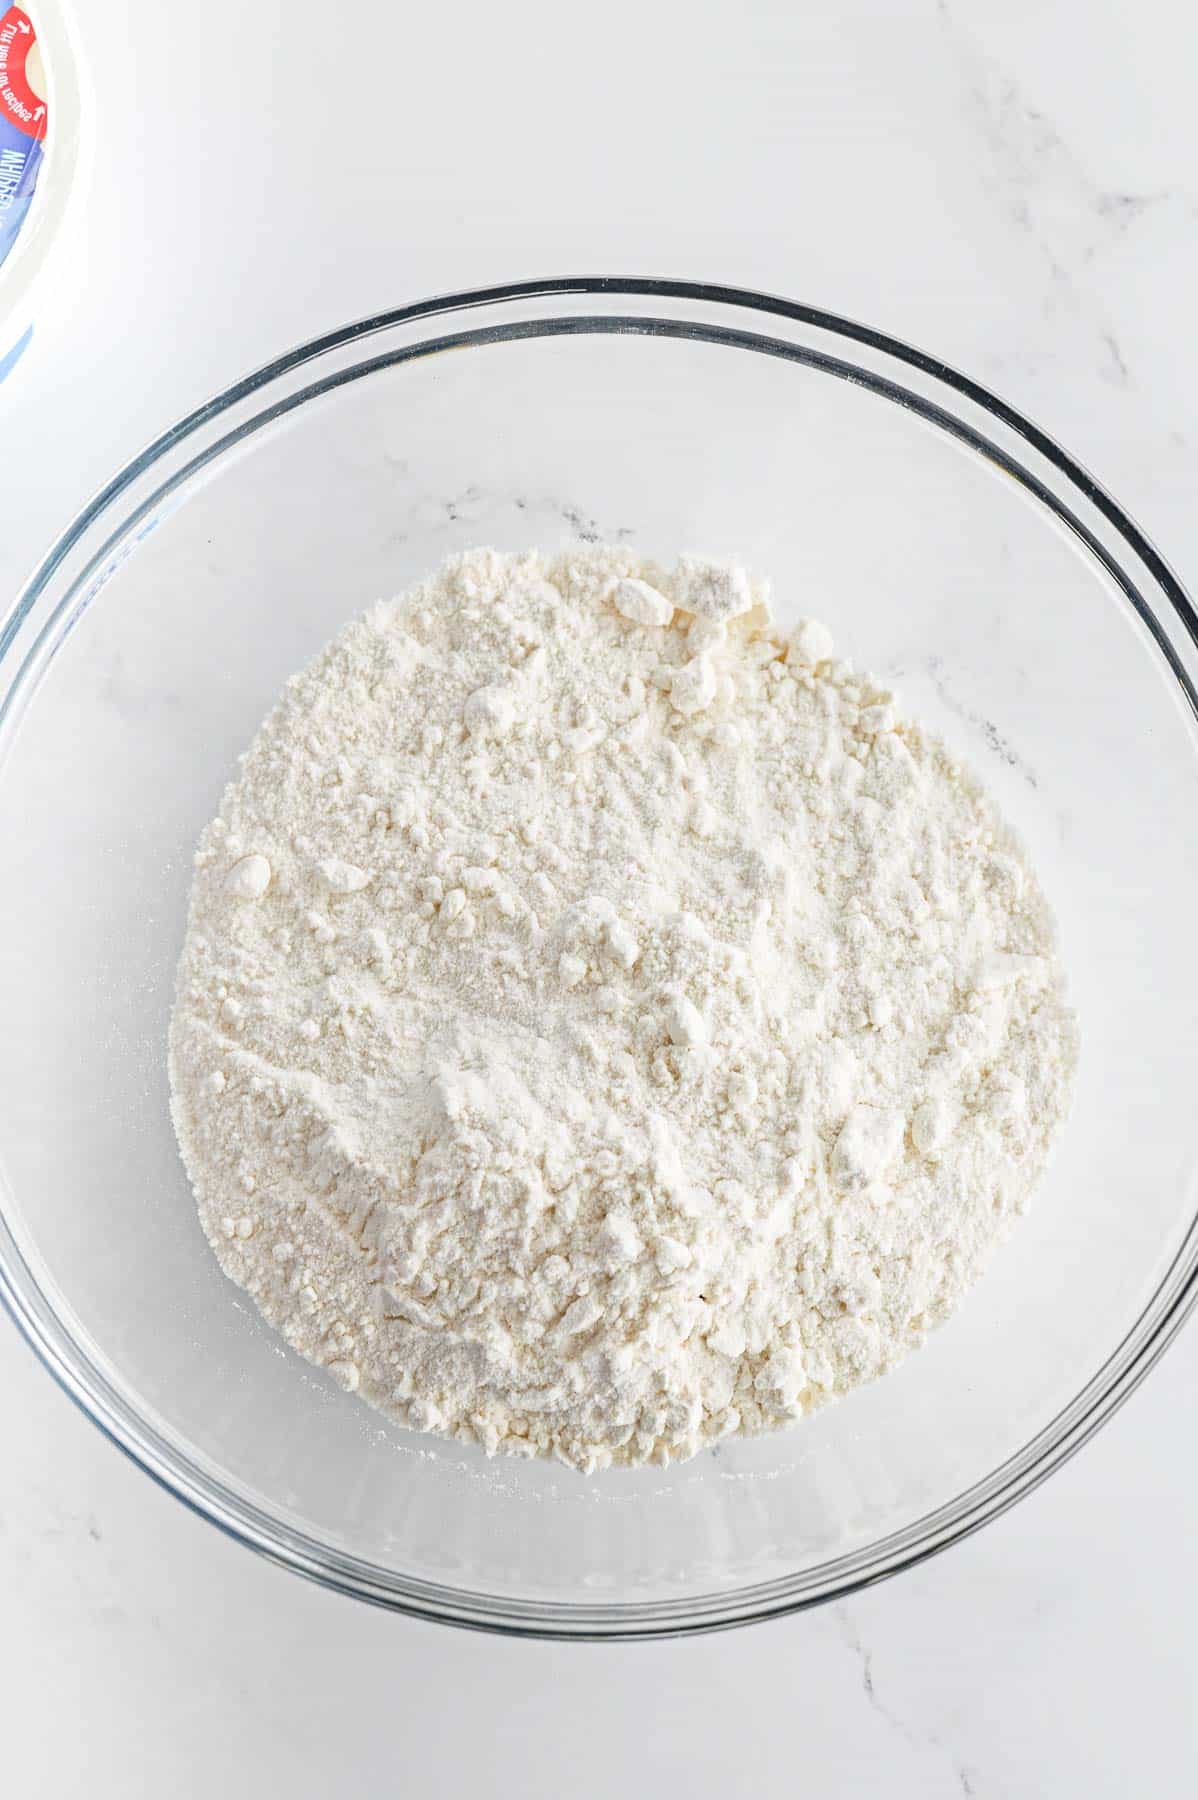 A glass mixing bowl of dry white cake mix.